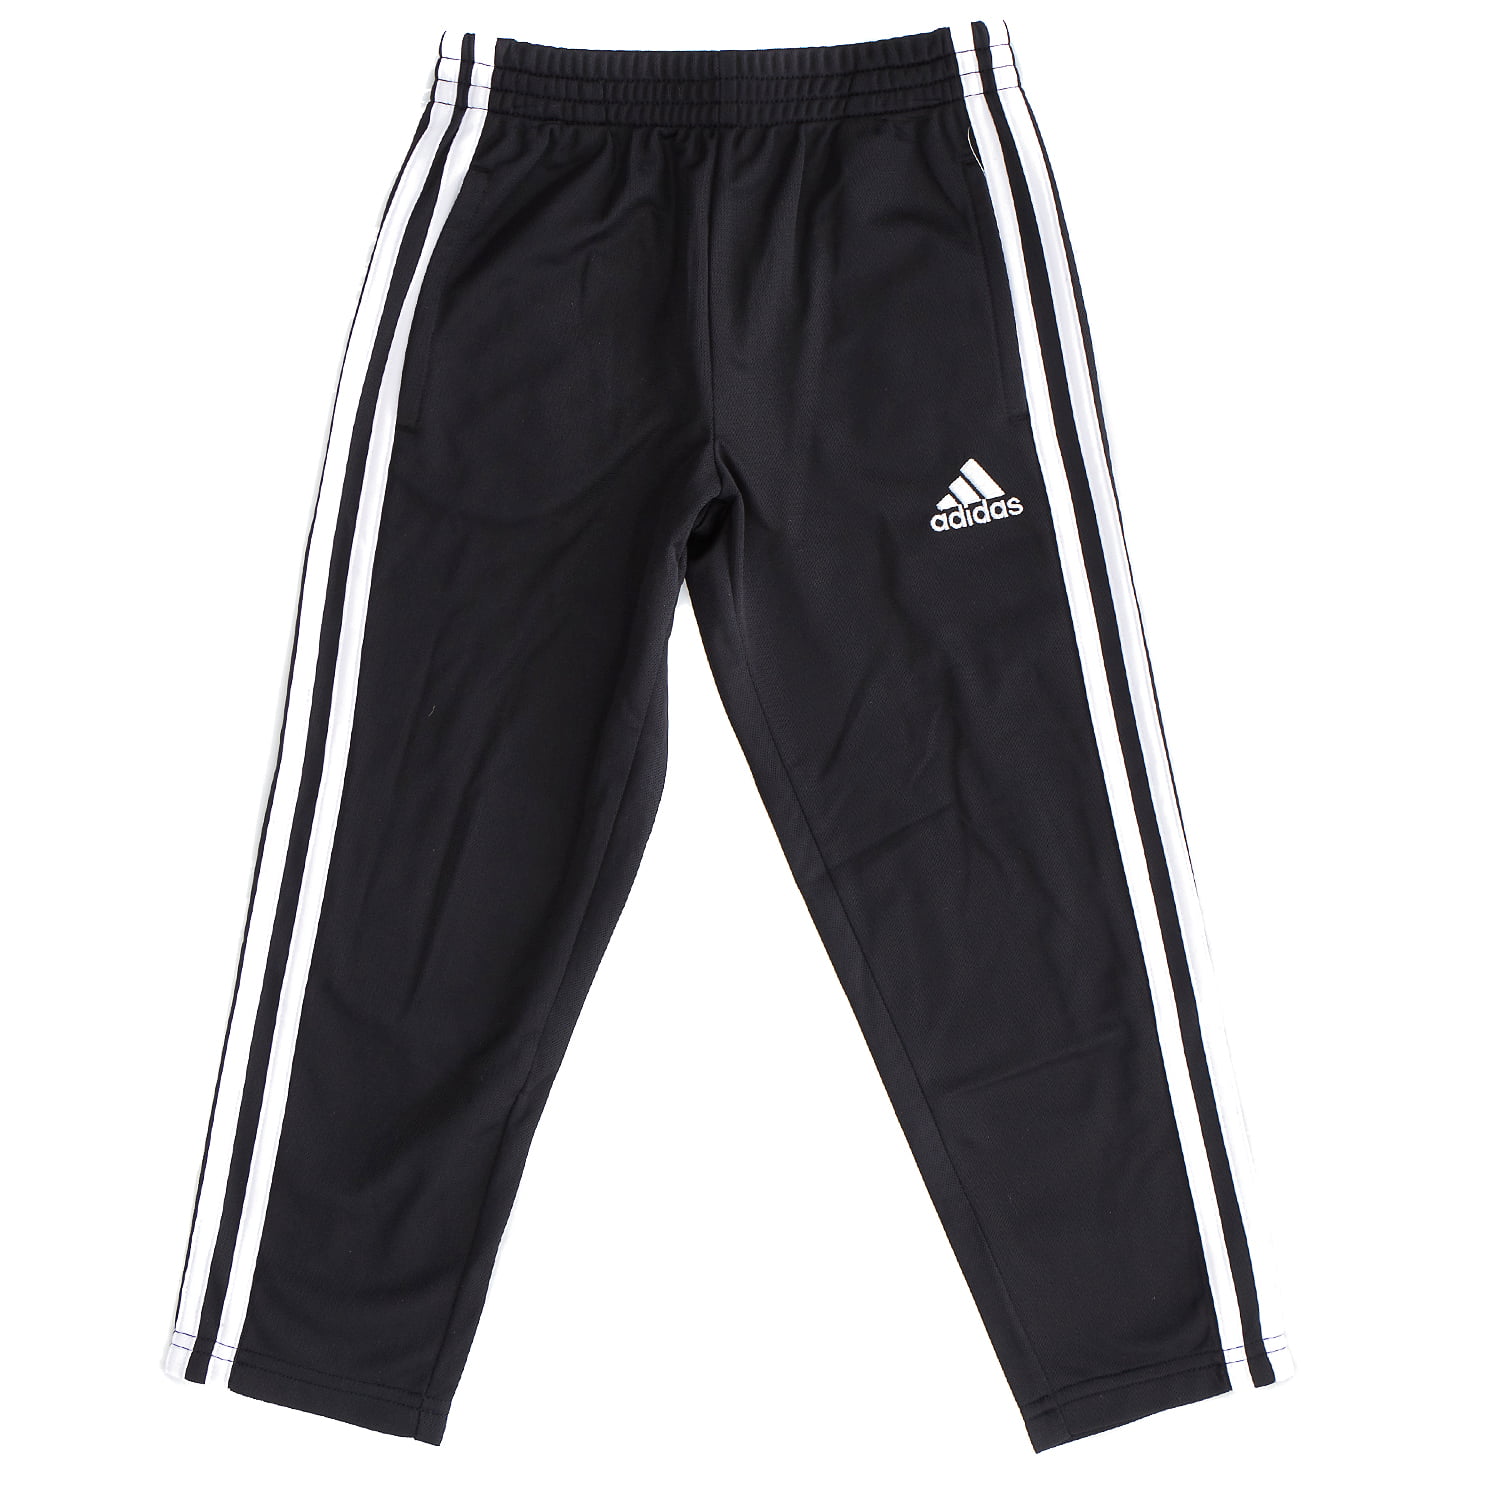 Adidas Toddler Kid's 2T-7X Trainer Pant 